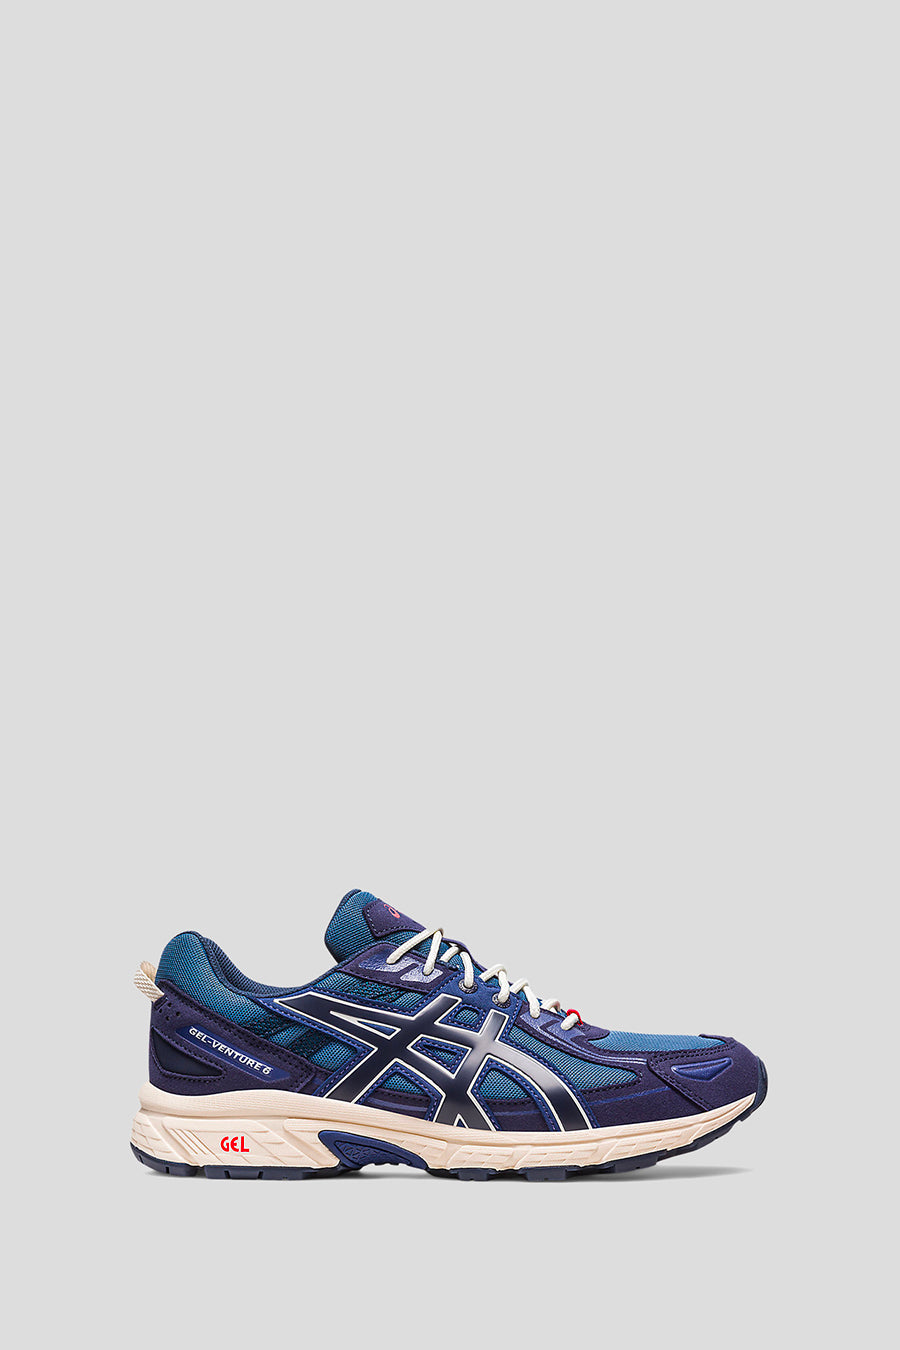 Asics - SNEAKERS GEL-VENTURE 6 GRAND SHARK AND MIDNIGHT - LE LABO STORE